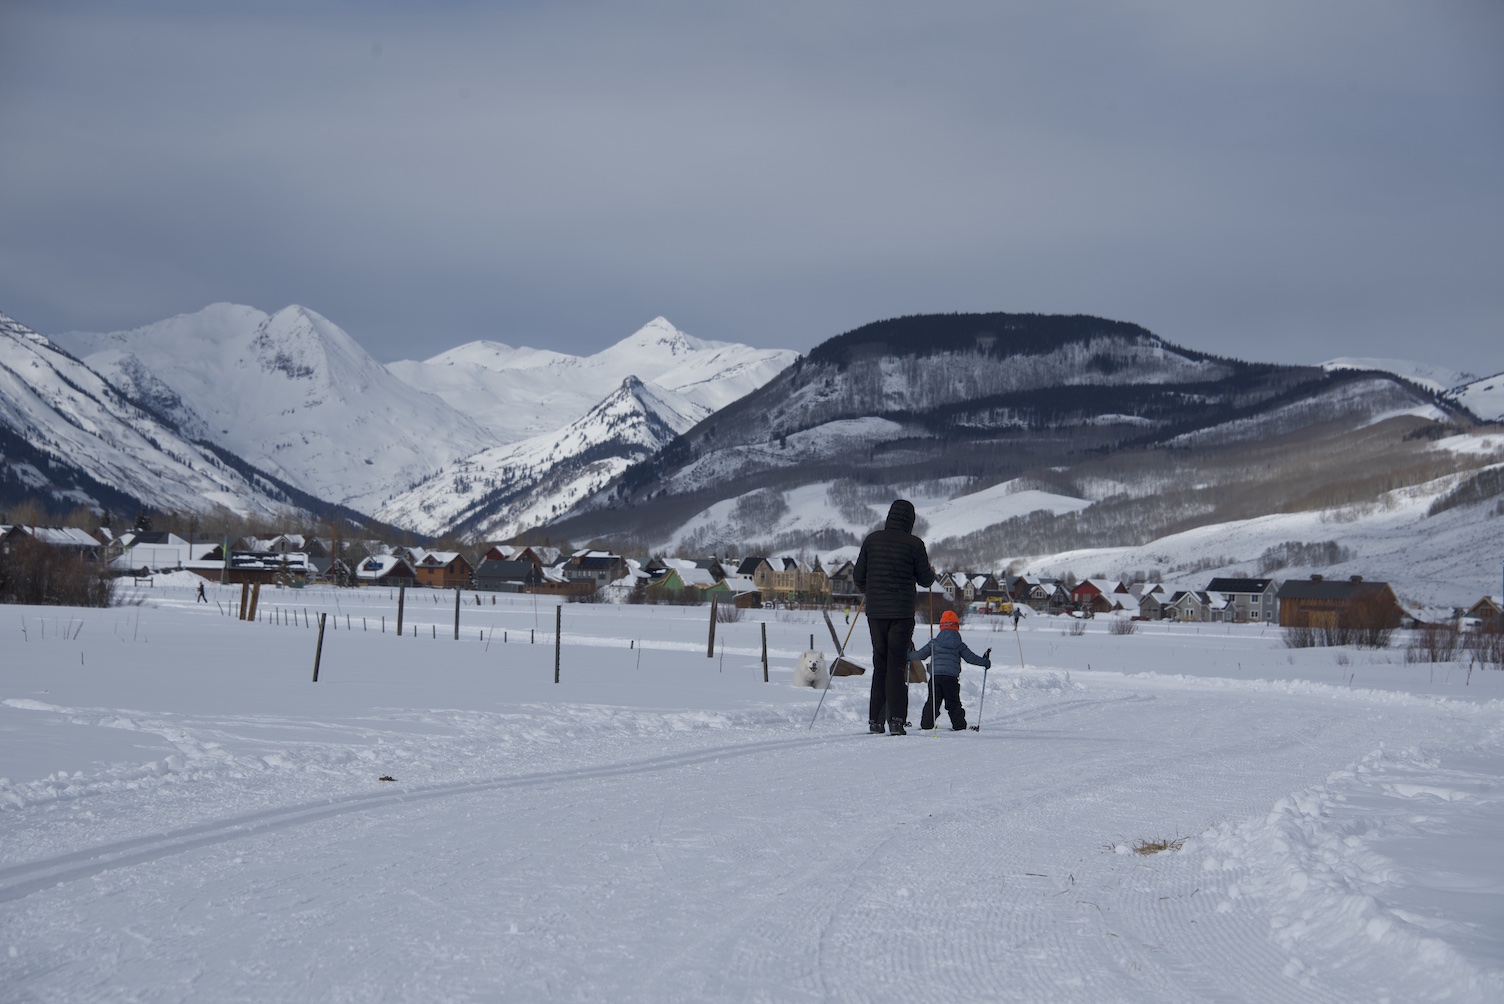 A parent and a child skiing on a nordic track. Go nordic skiing with kids in Crested Butte